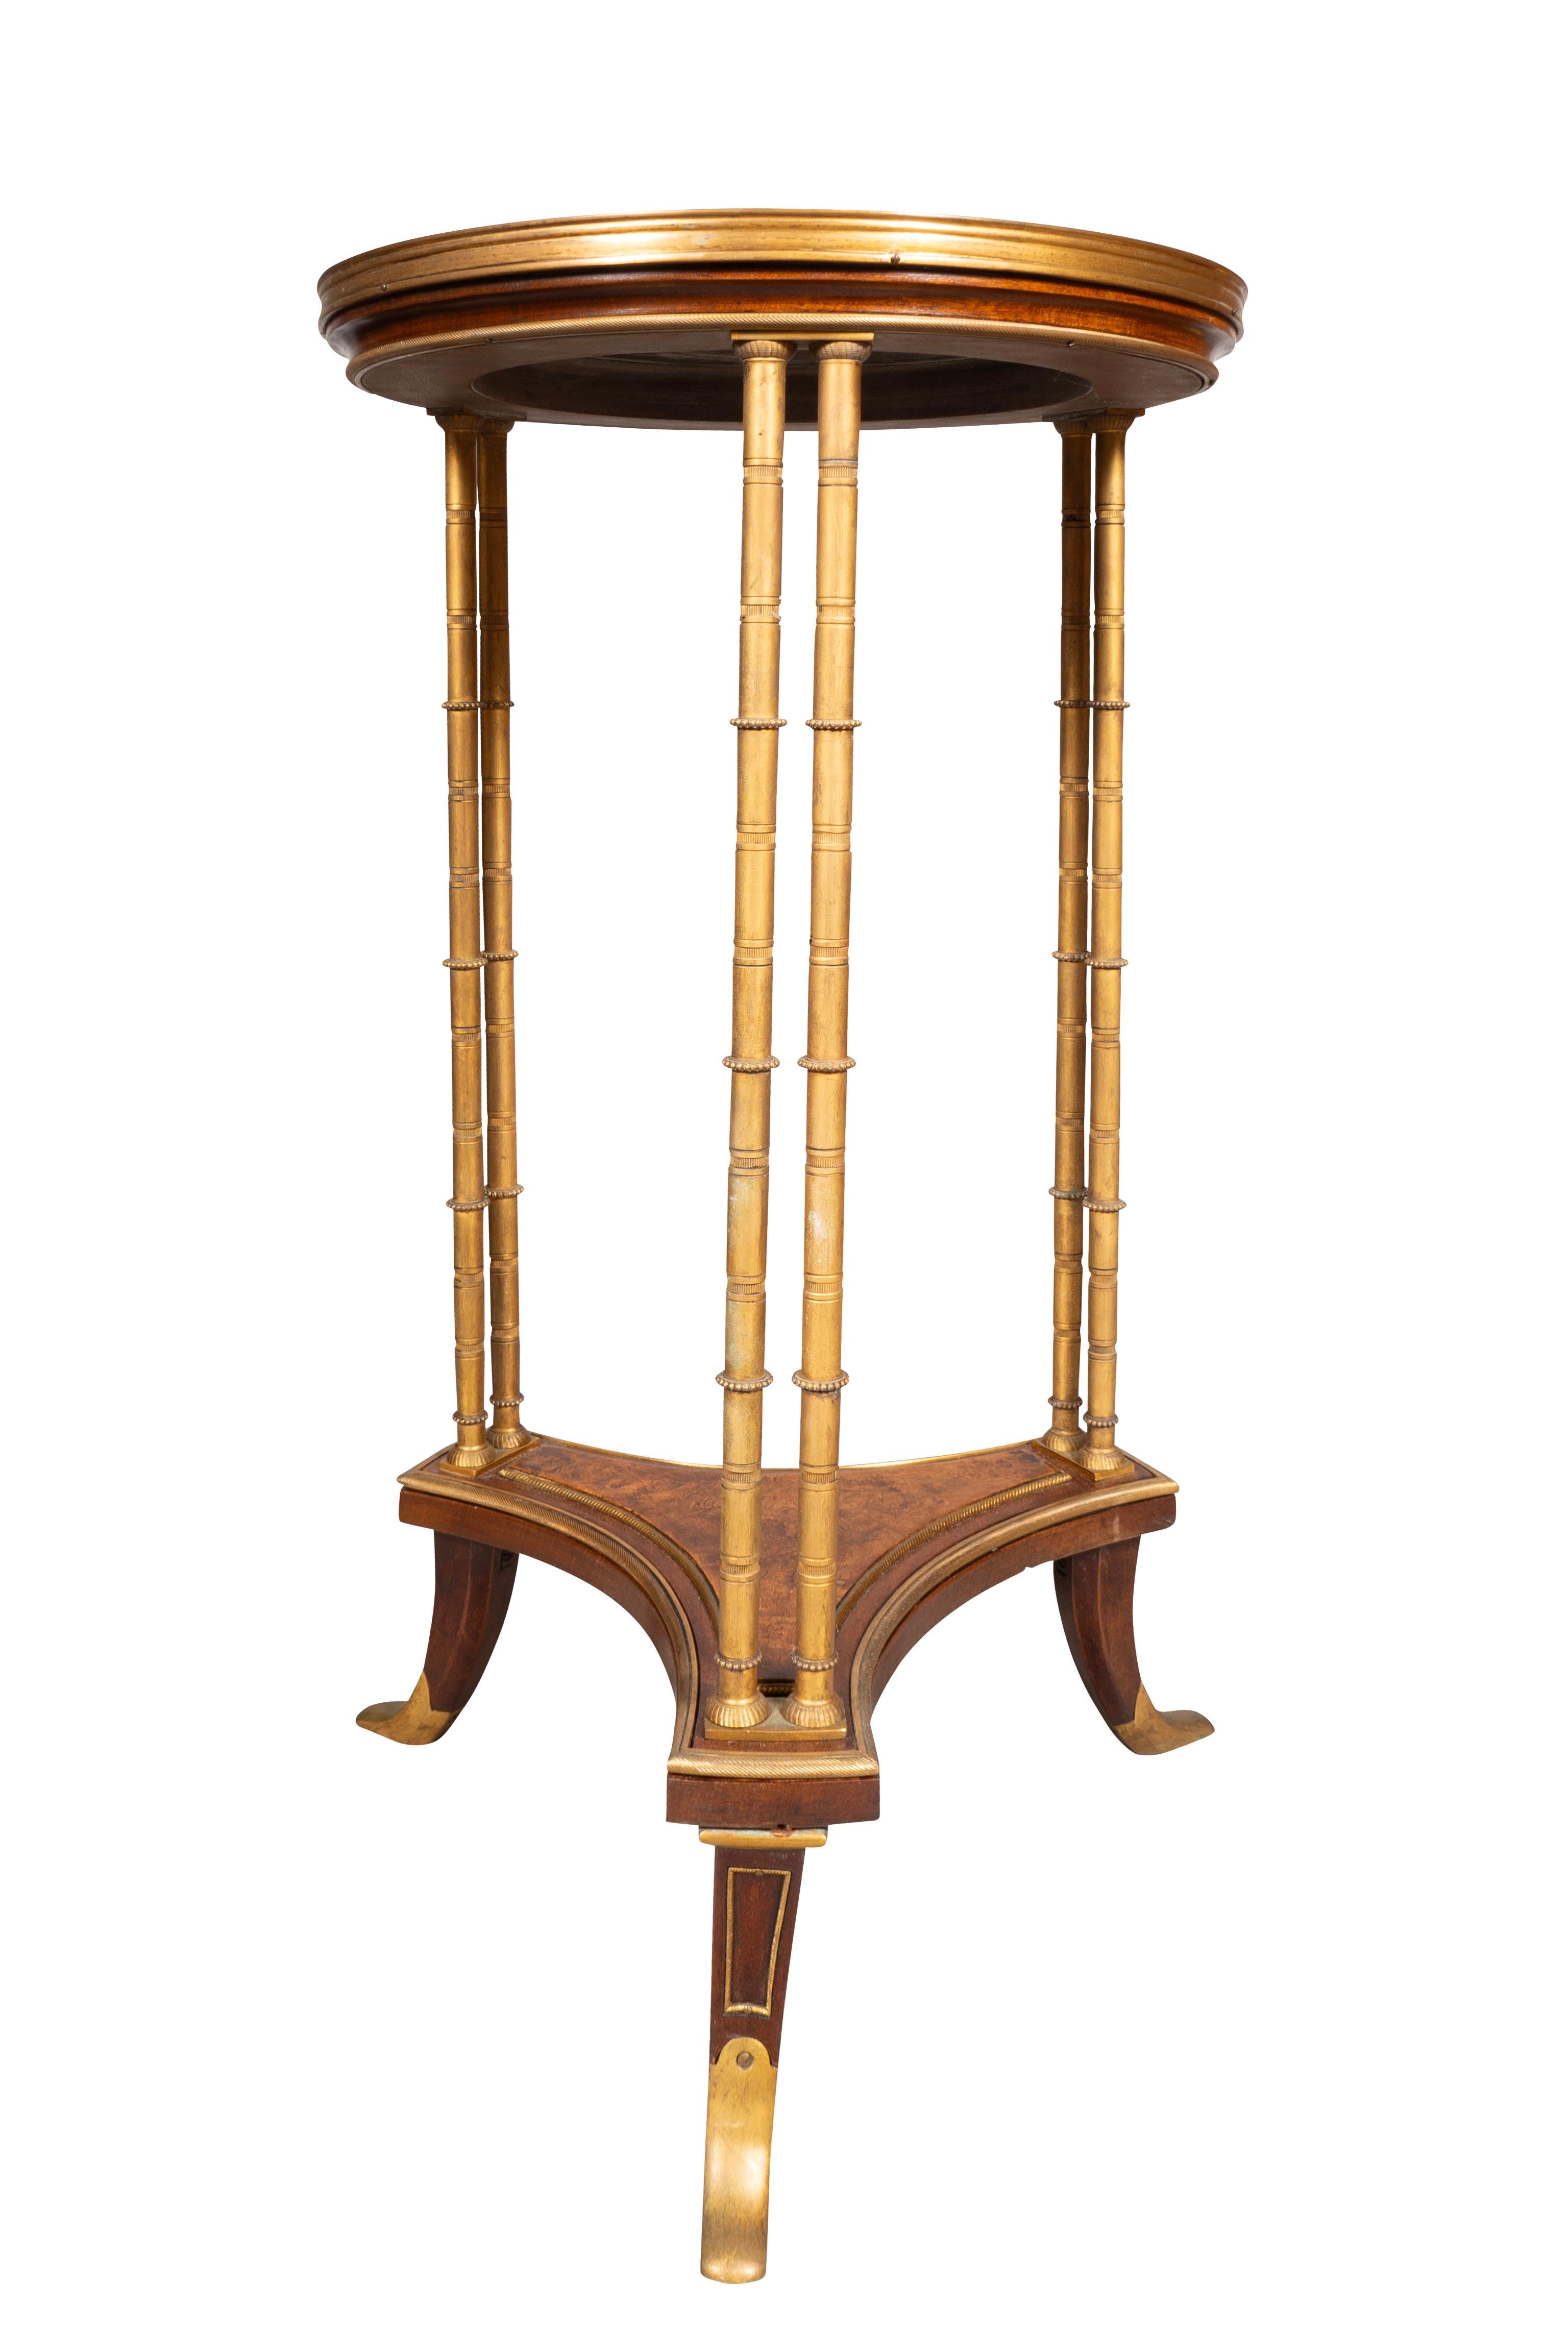 Circular inset black granite top with metal banded edge and three faux bamboo cluster column supports joining a lower tripartite stretcher. Ending on bronze capped saber legs.